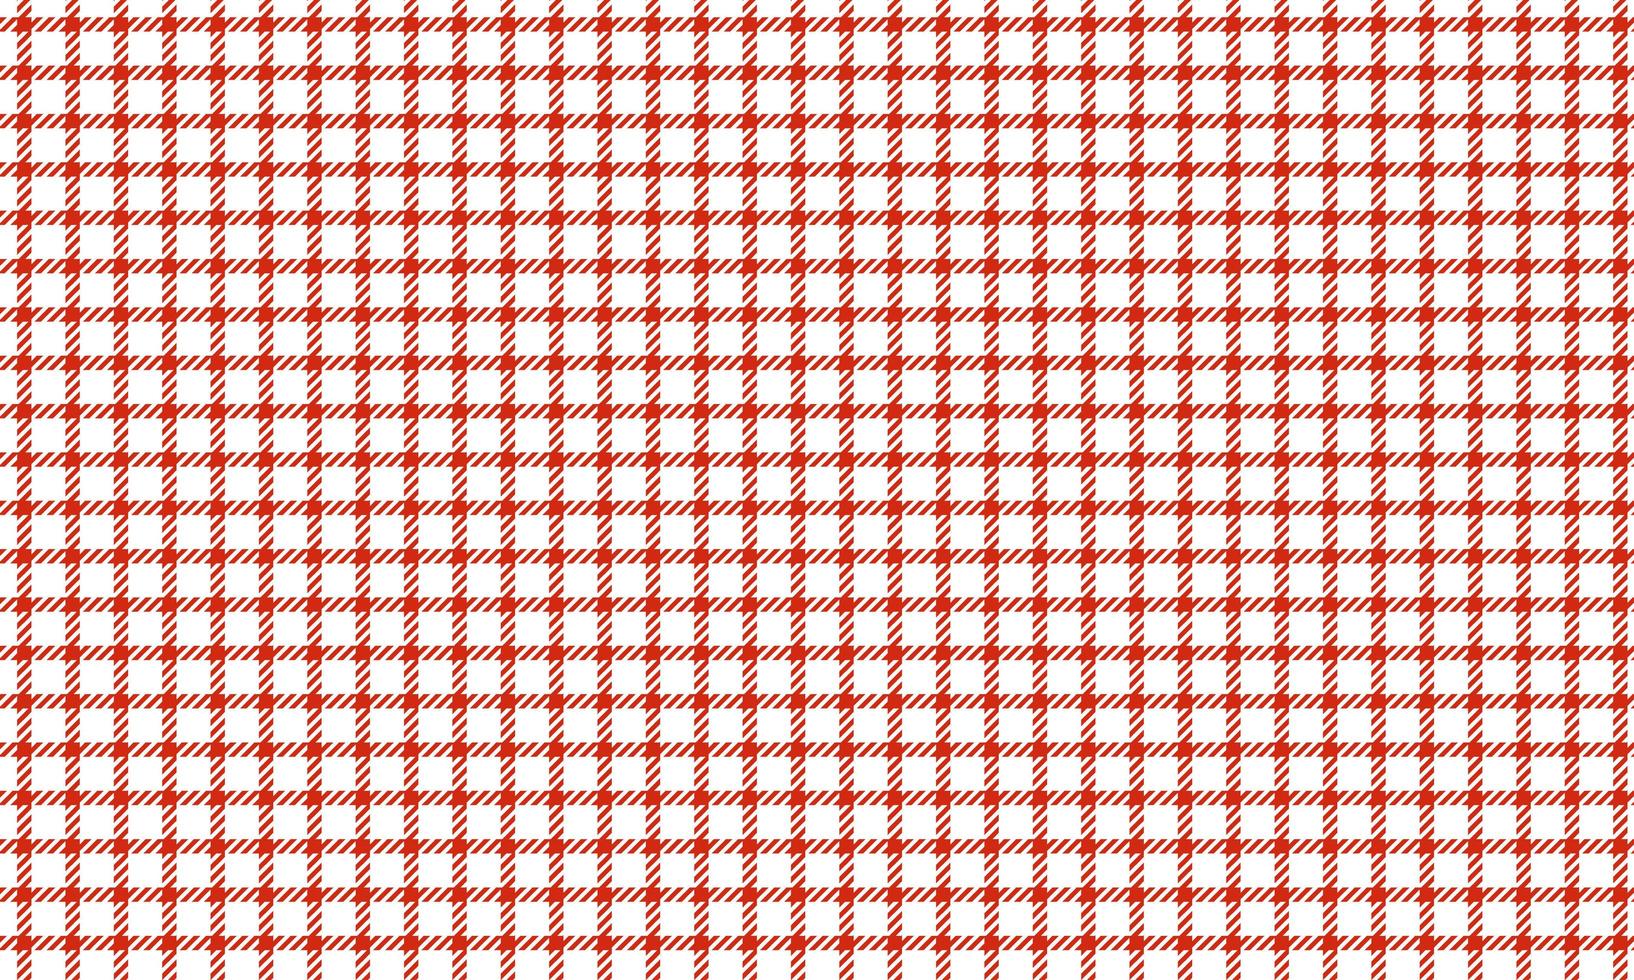 Red Checkered Pattern Background photo